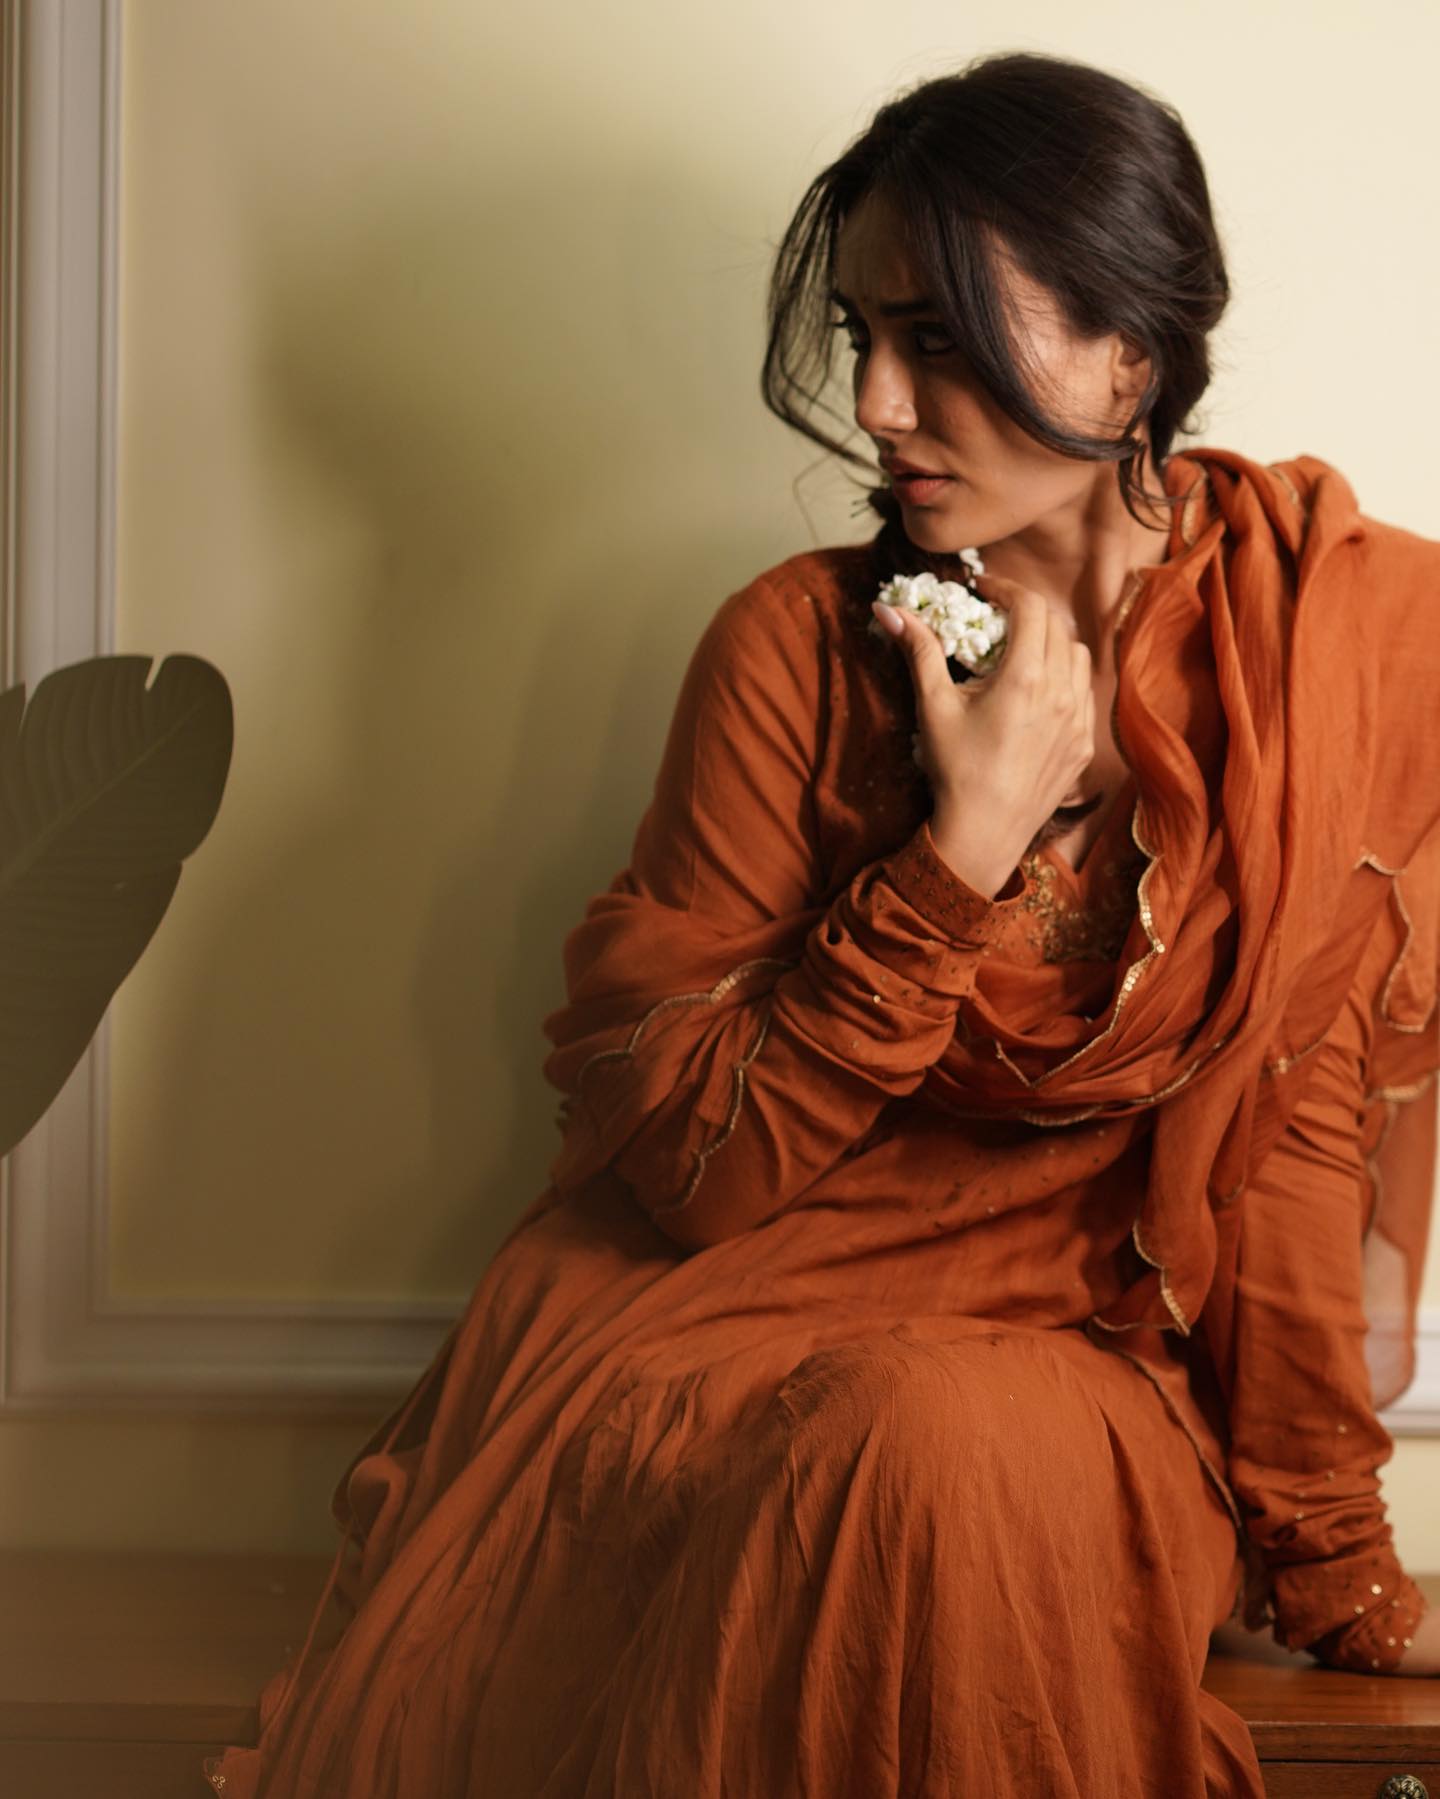 In this picture, Surbhi Jyoti donned an elegant orange suit with a matching dupatta